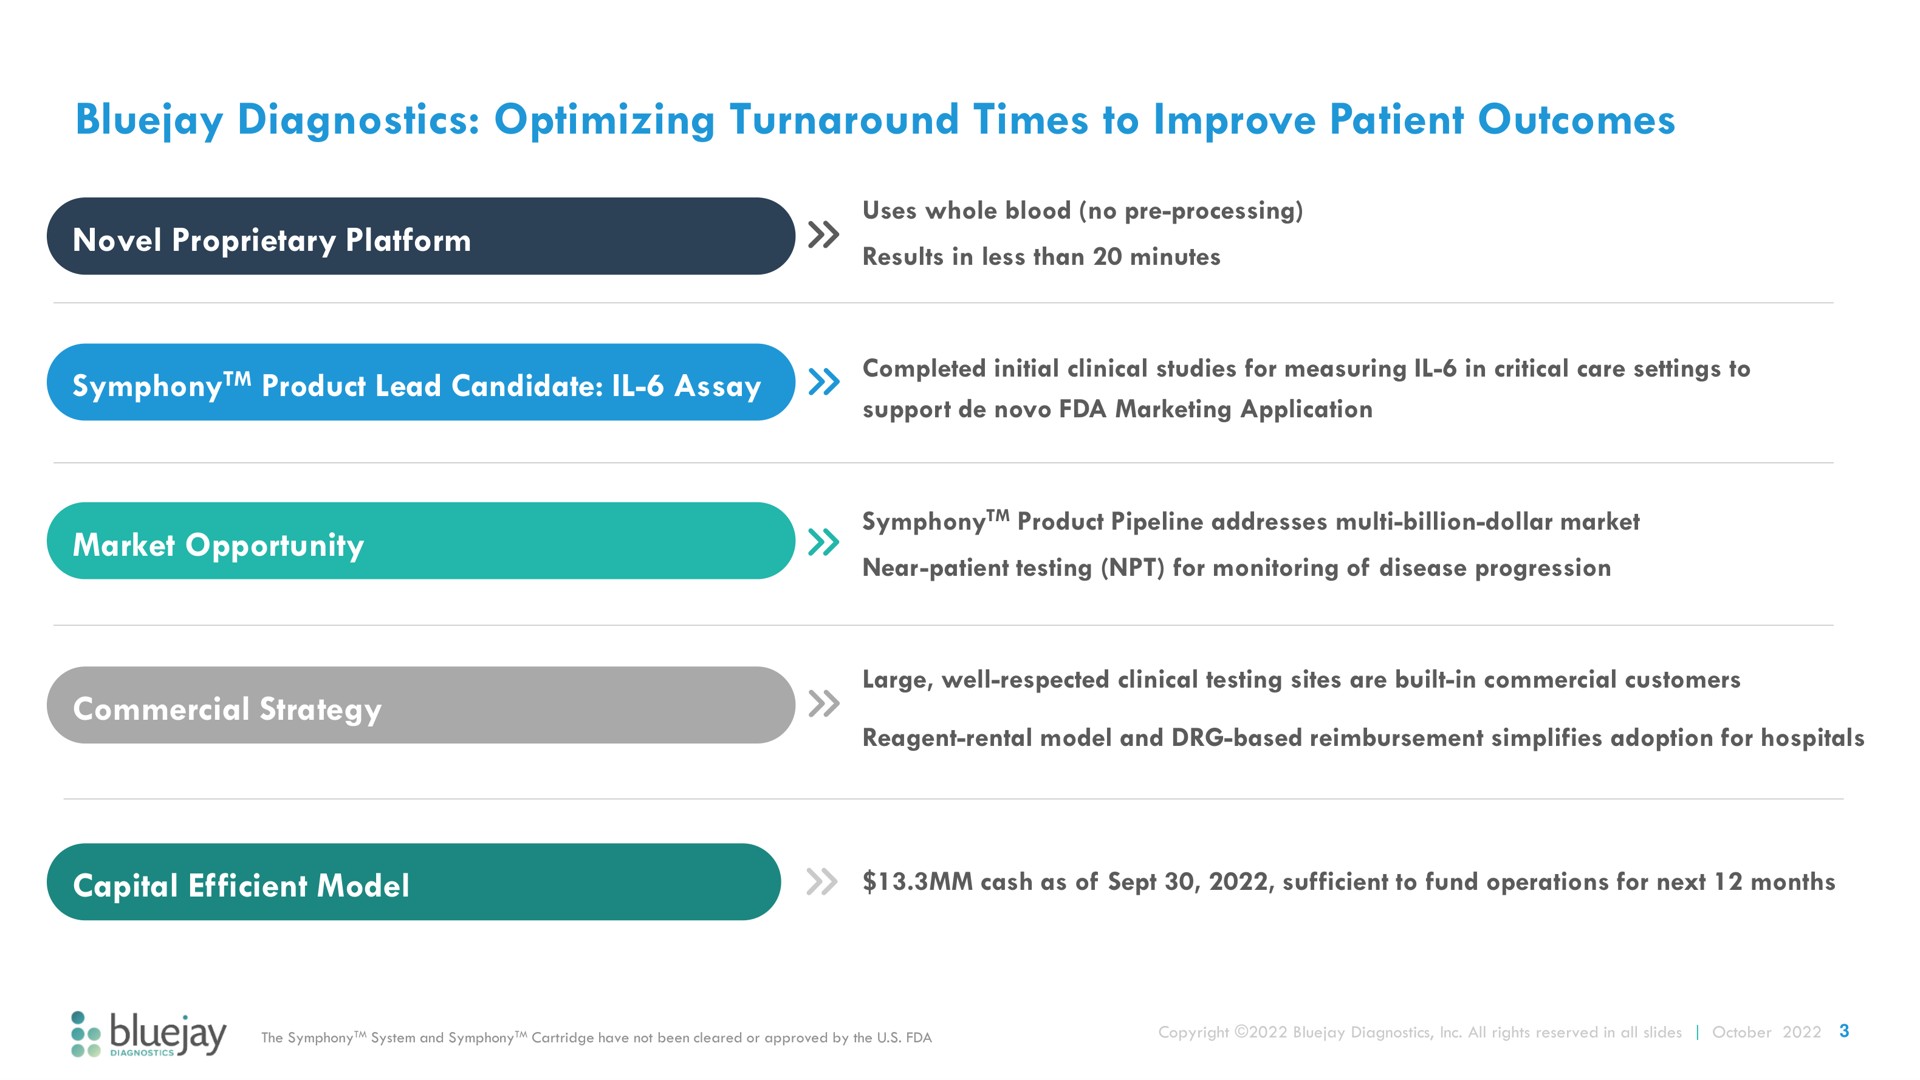 diagnostics optimizing turnaround times to improve patient outcomes market opportunity commercial strategy | Bluejay